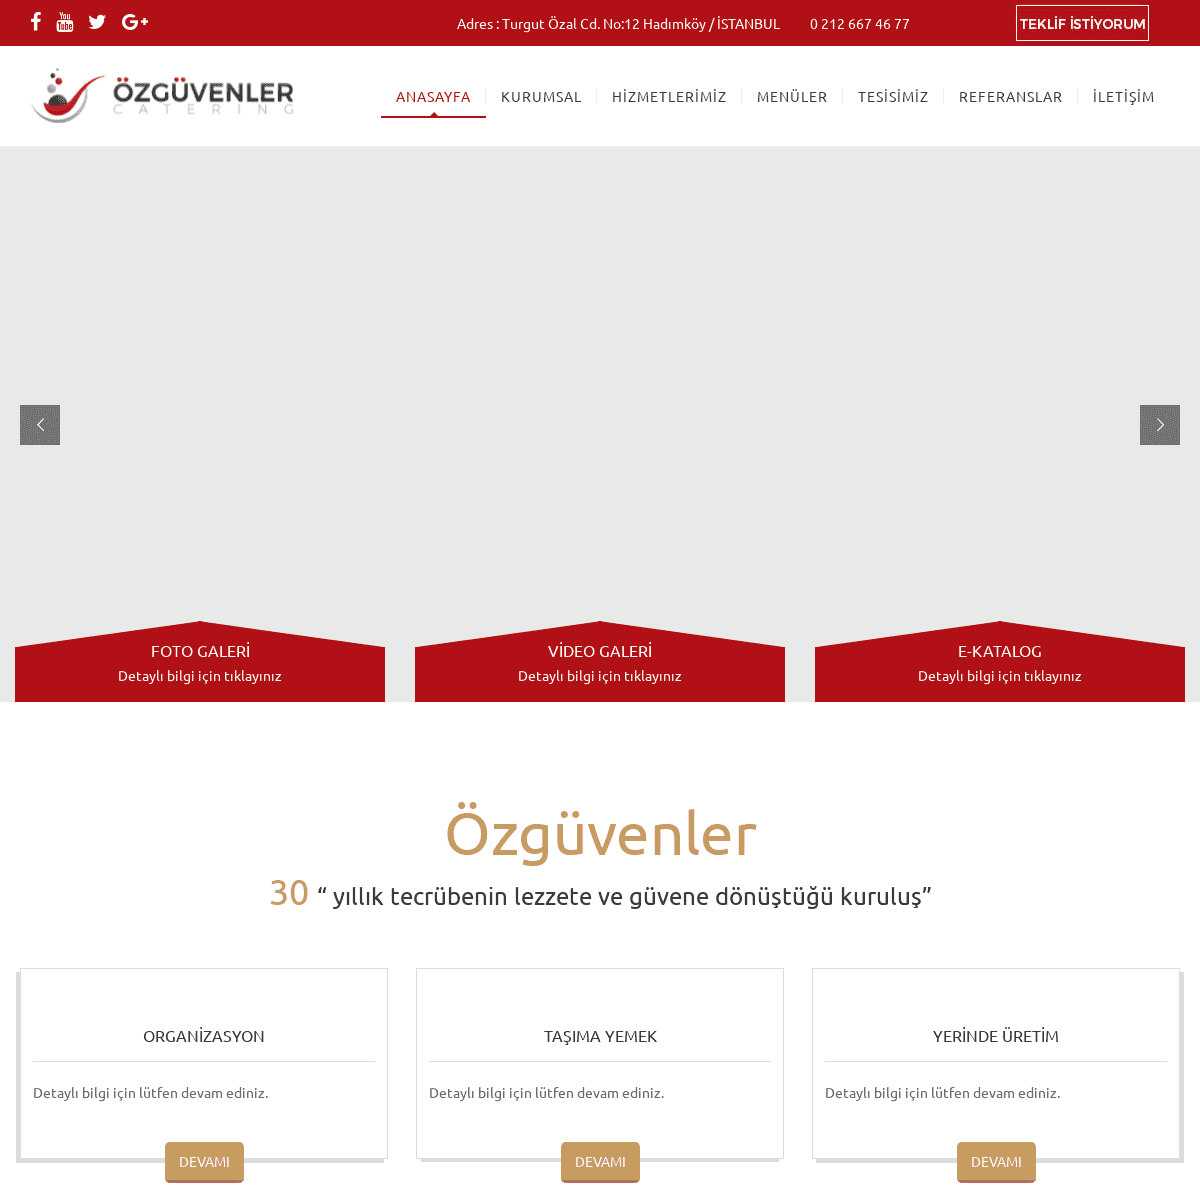 A complete backup of https://ozguvenlercatering.com